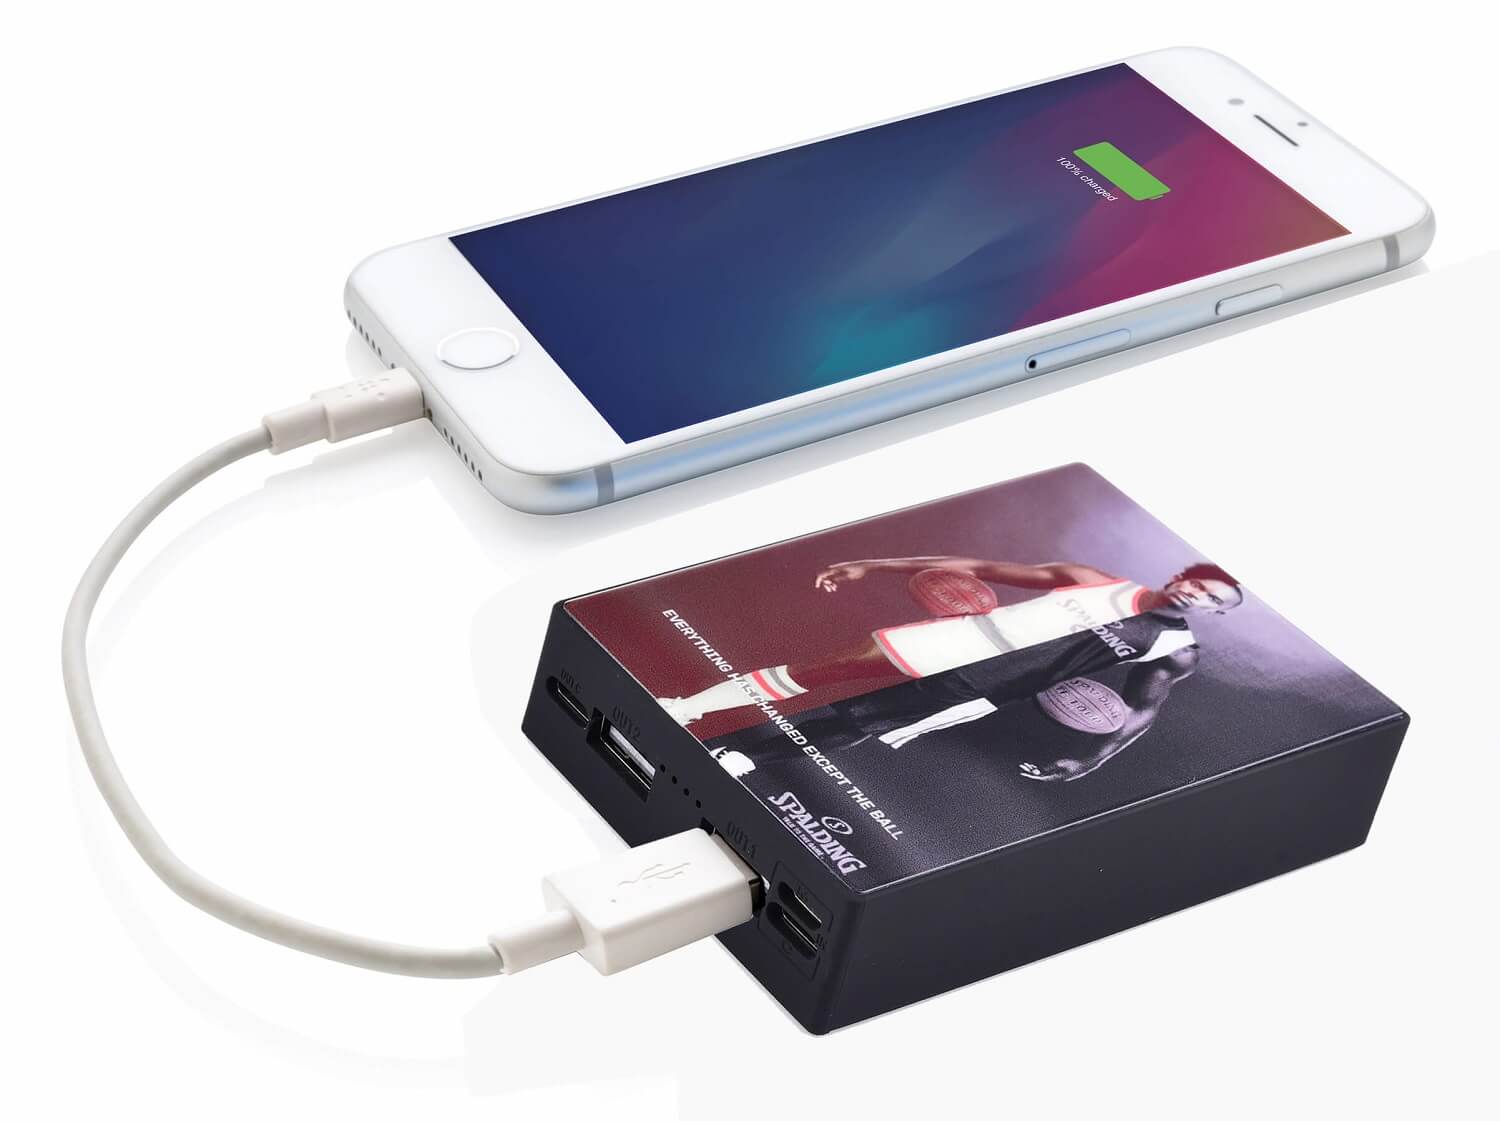 Tempered glass power bank charging a mobile phone